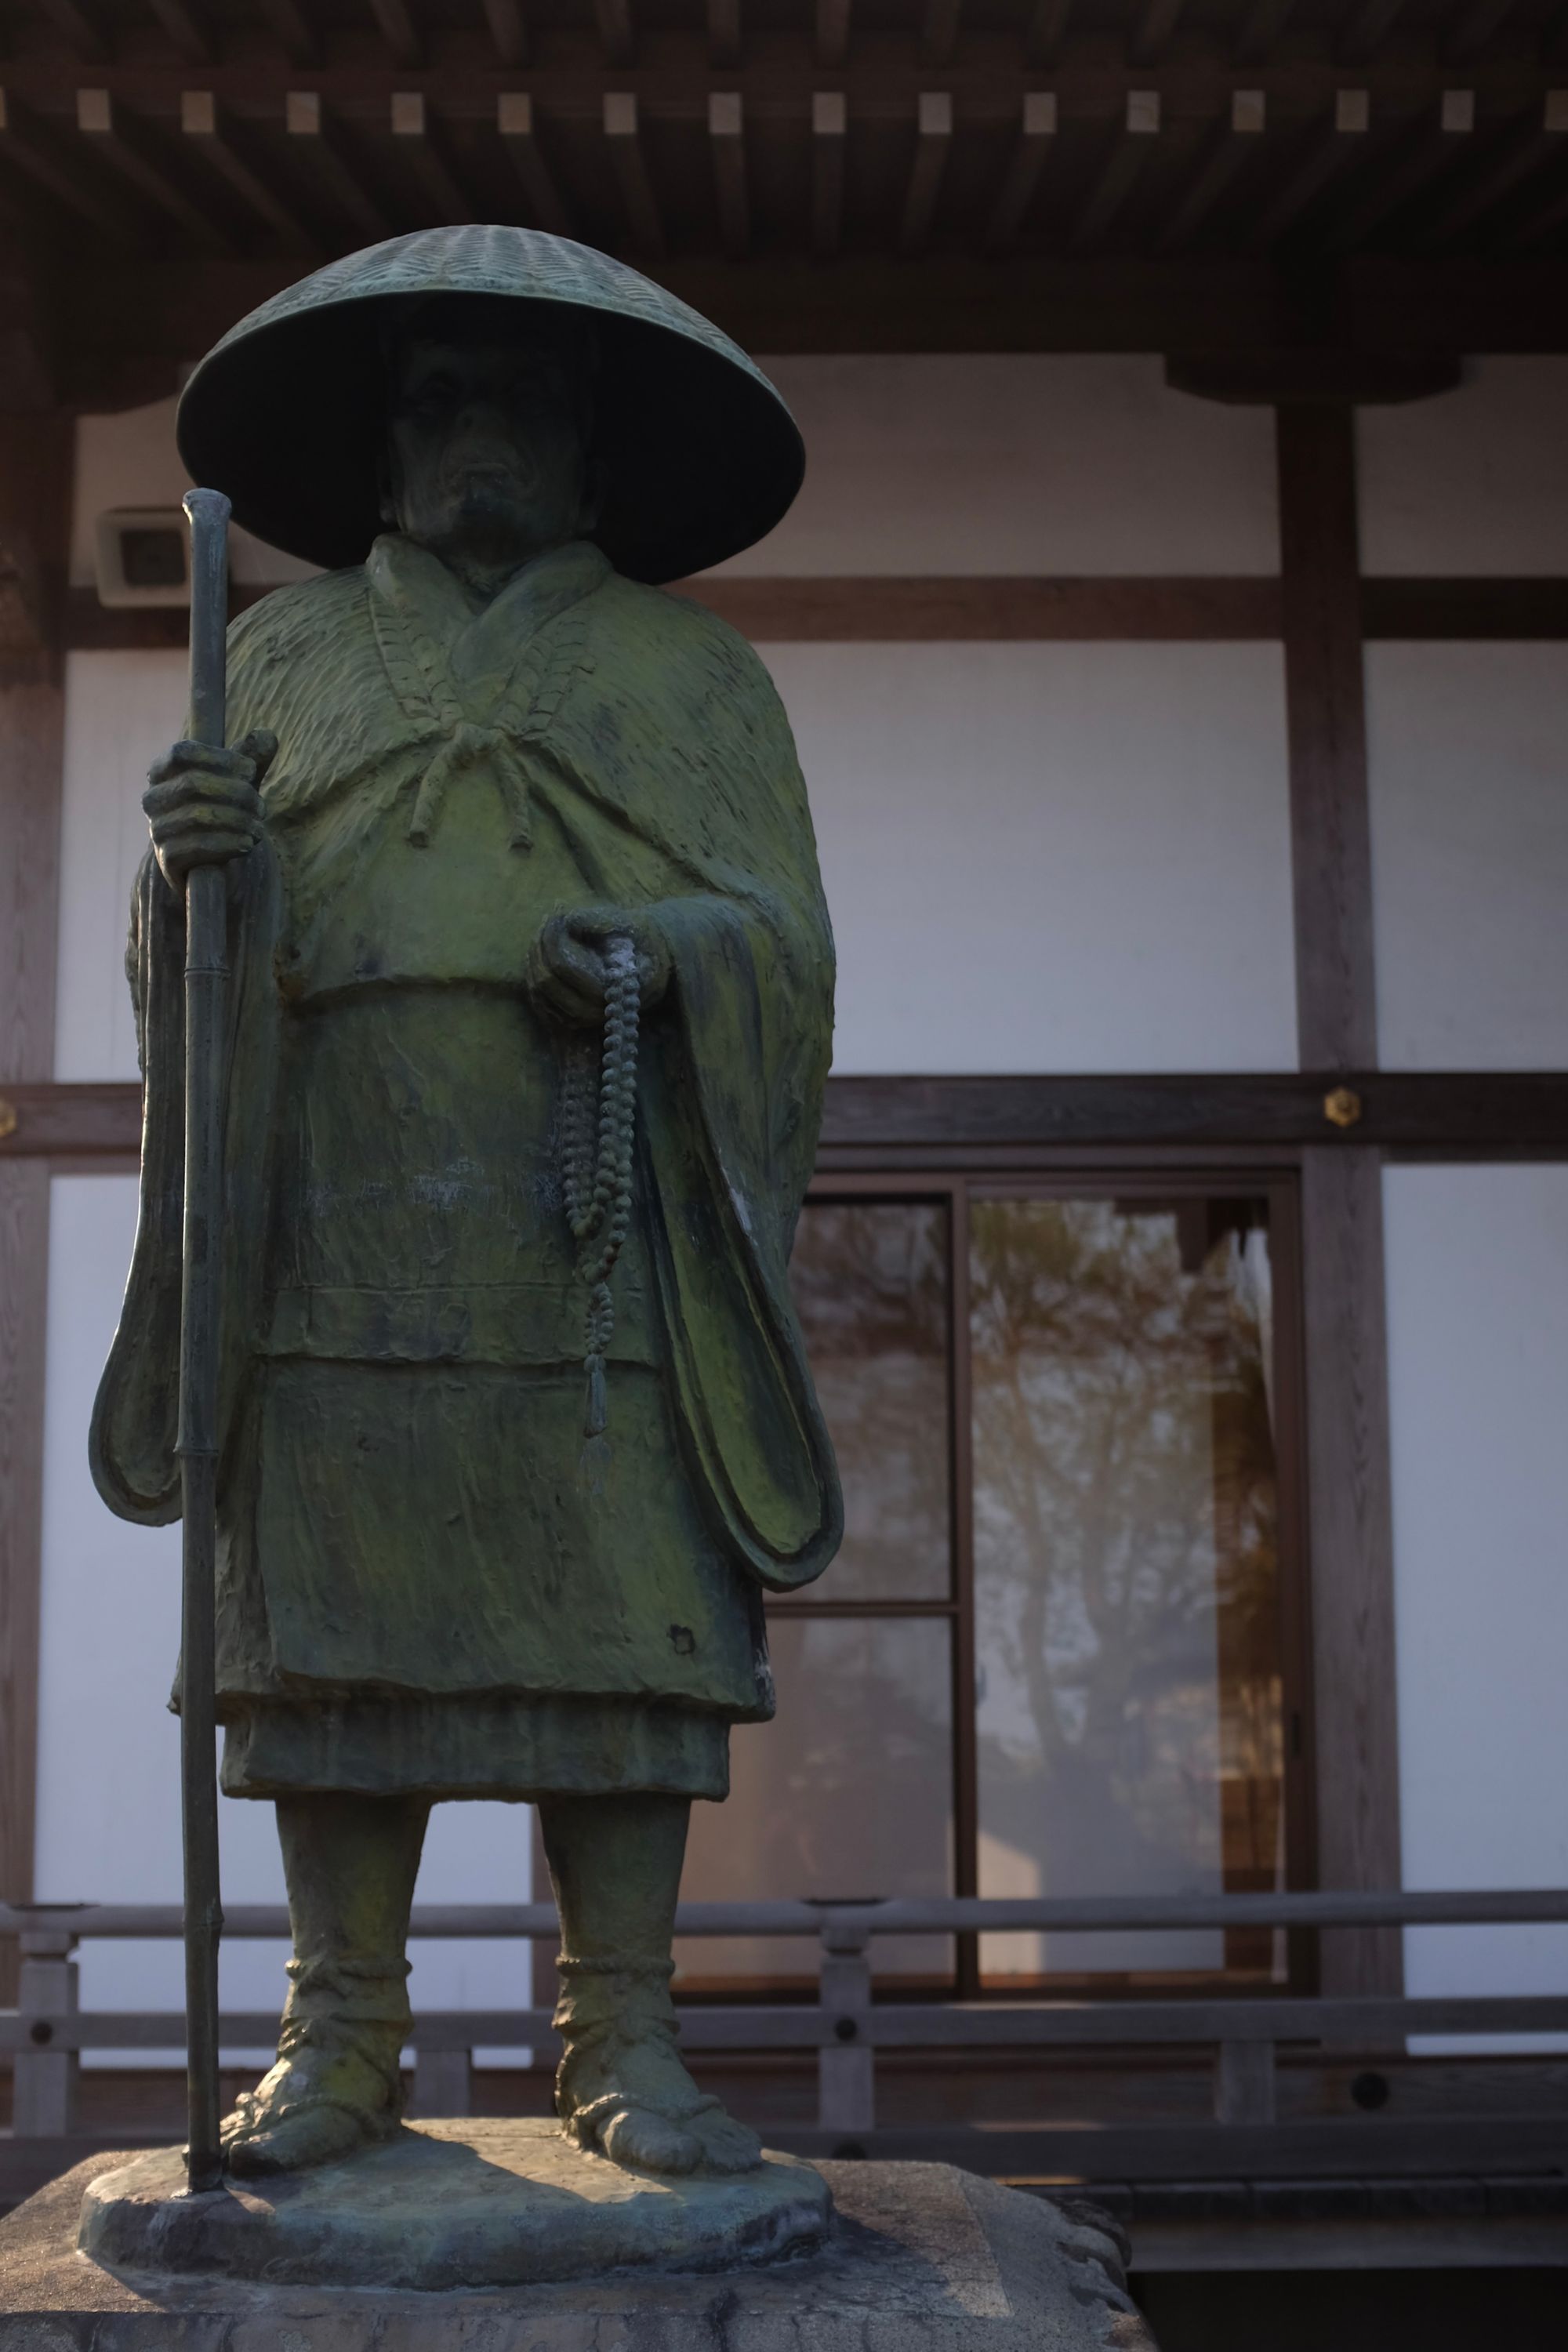 A statue of the Buddhist monk Kōbō Daishi, dressed in sandals and a straw hat, carrying a tall walking stick.